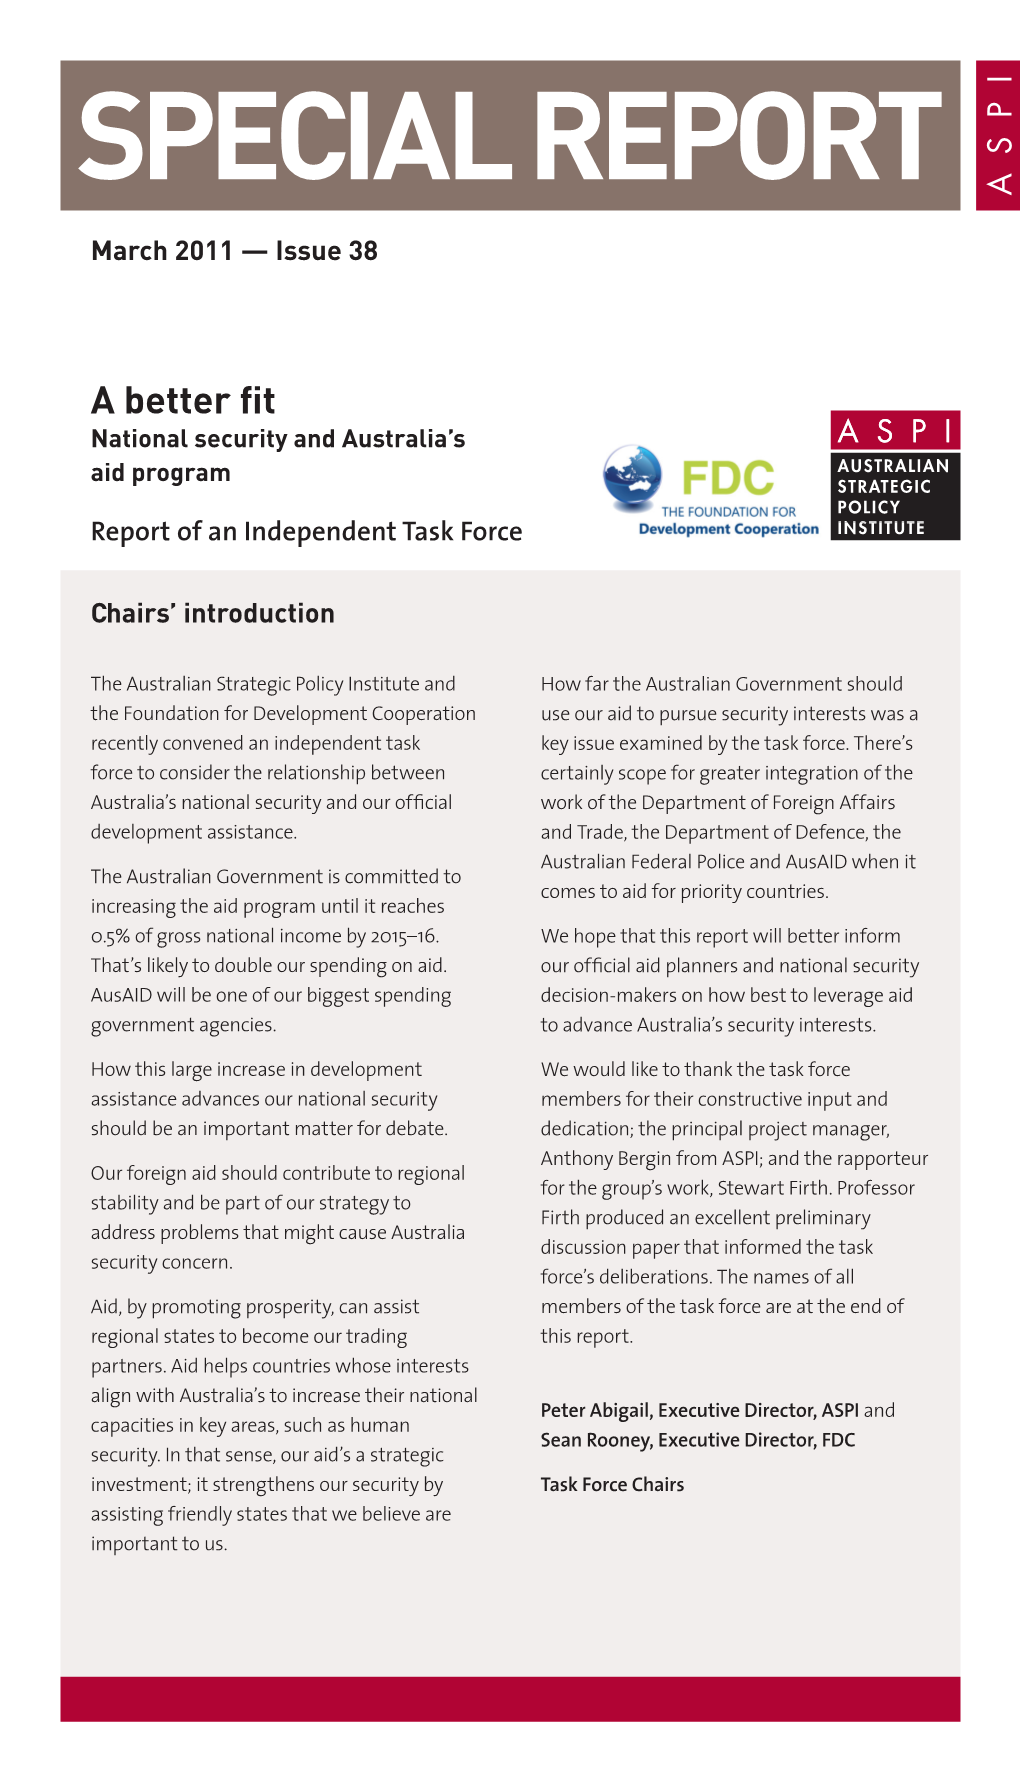 A Better Fit: National Security and Australia's Aid Program